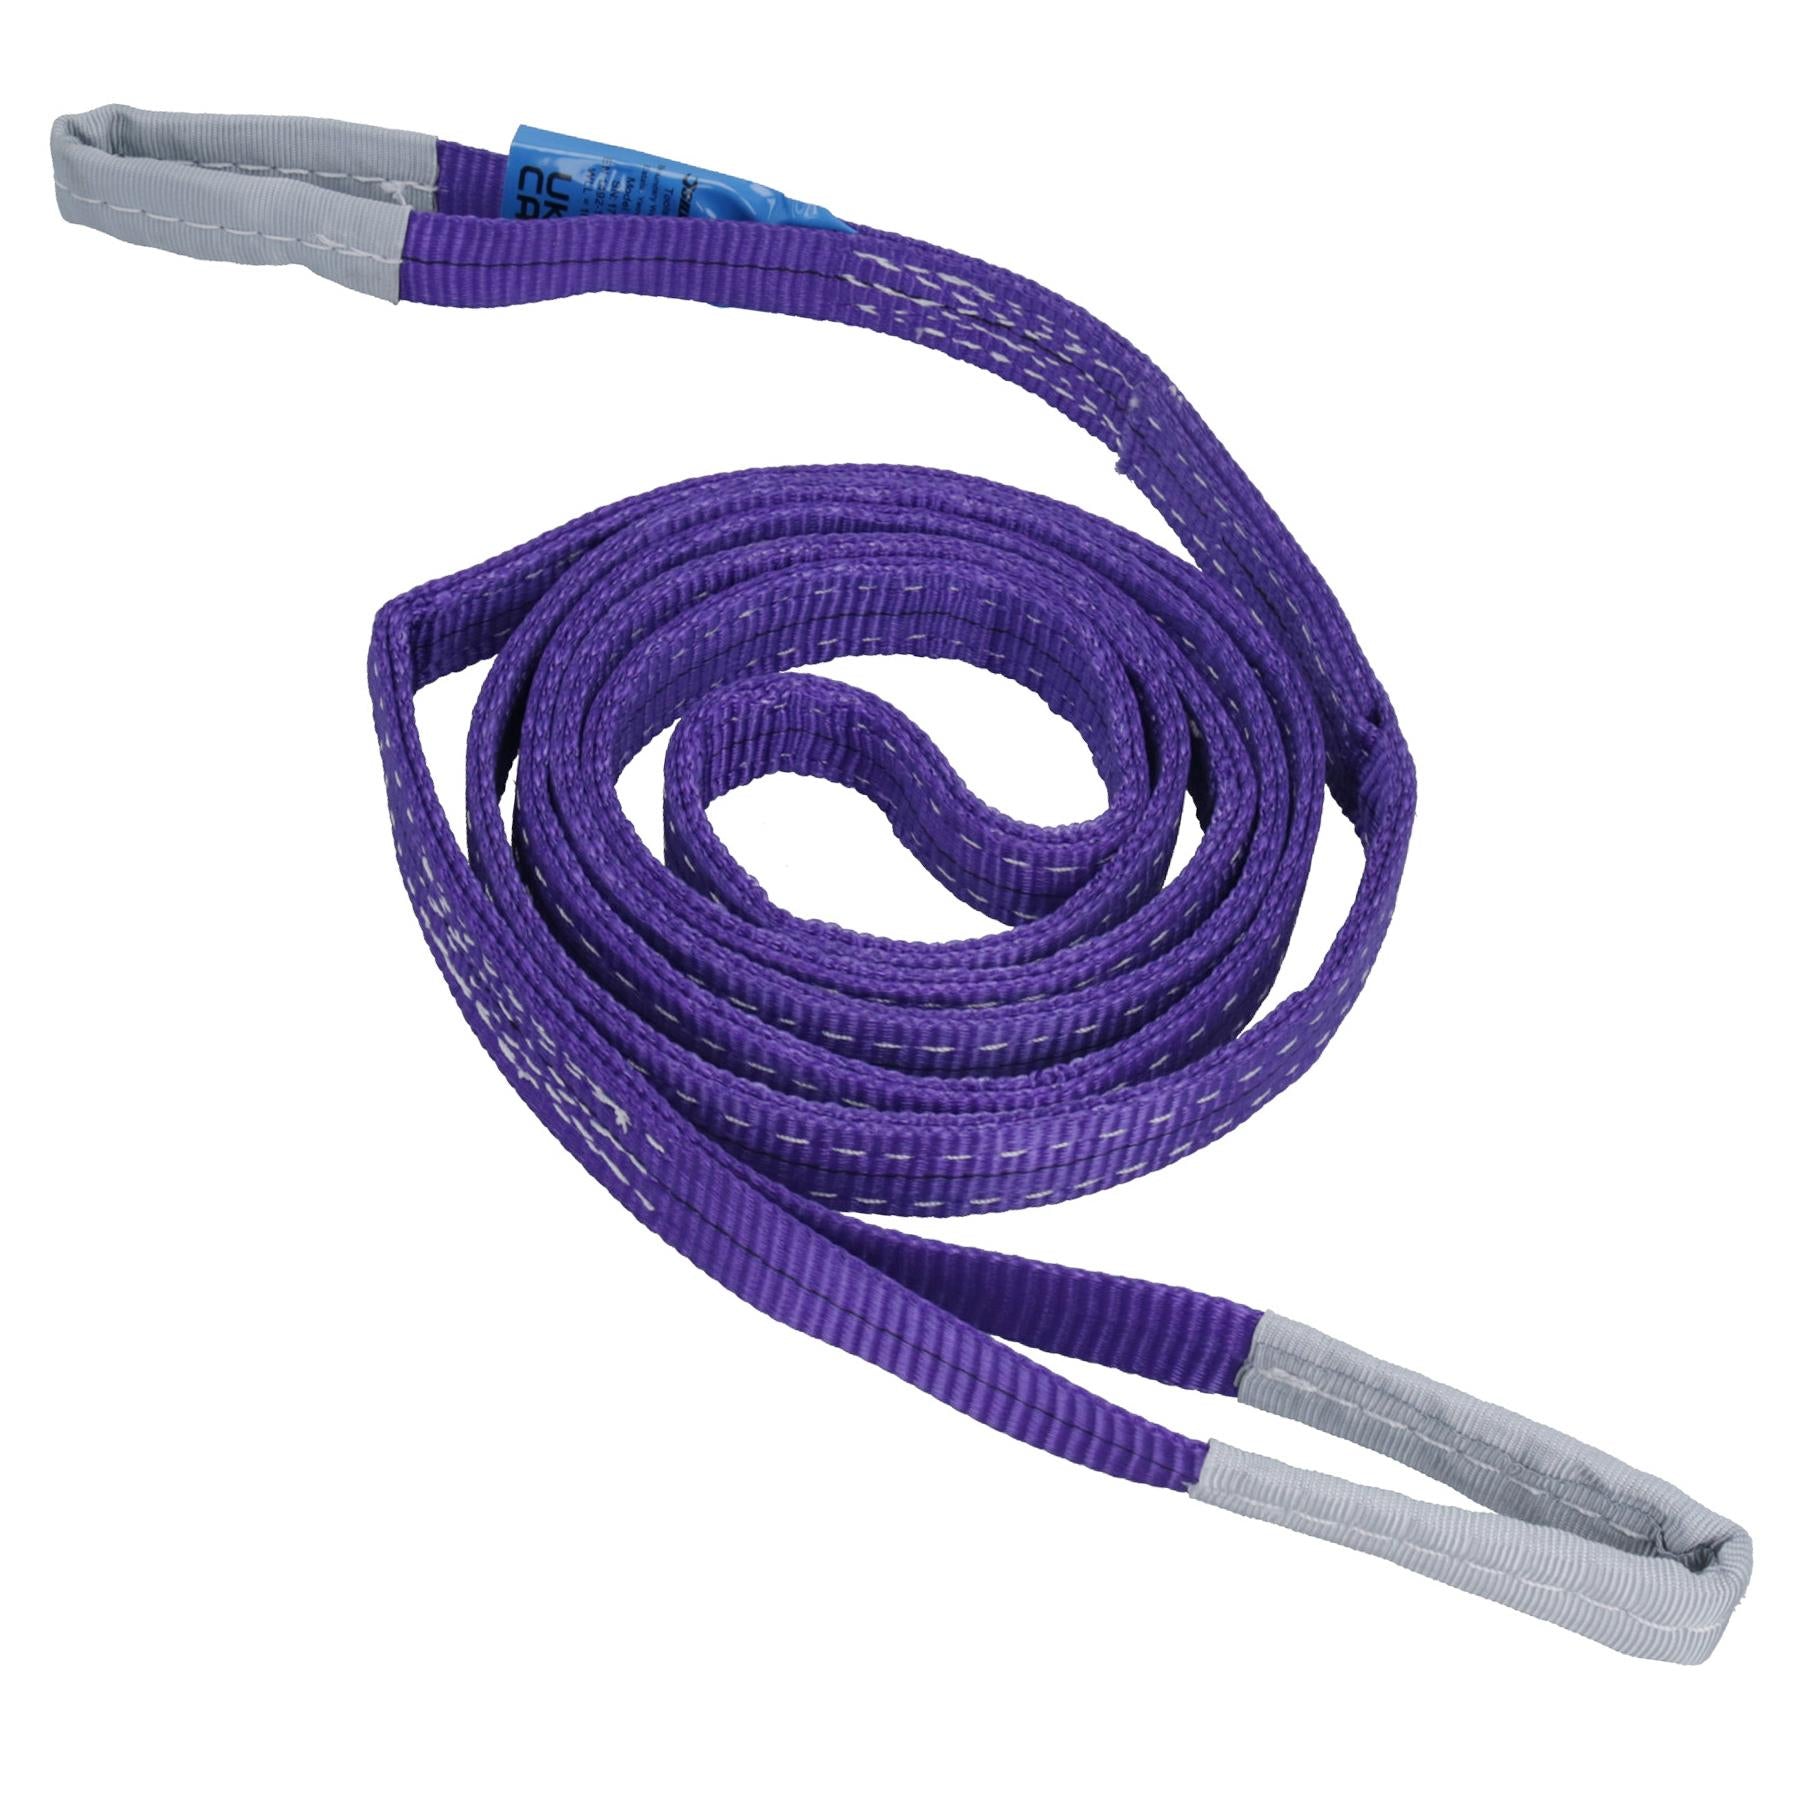 1 Ton 4 Metre Lifting Carrying Sling PES Polyester 7:1 Safety Factor